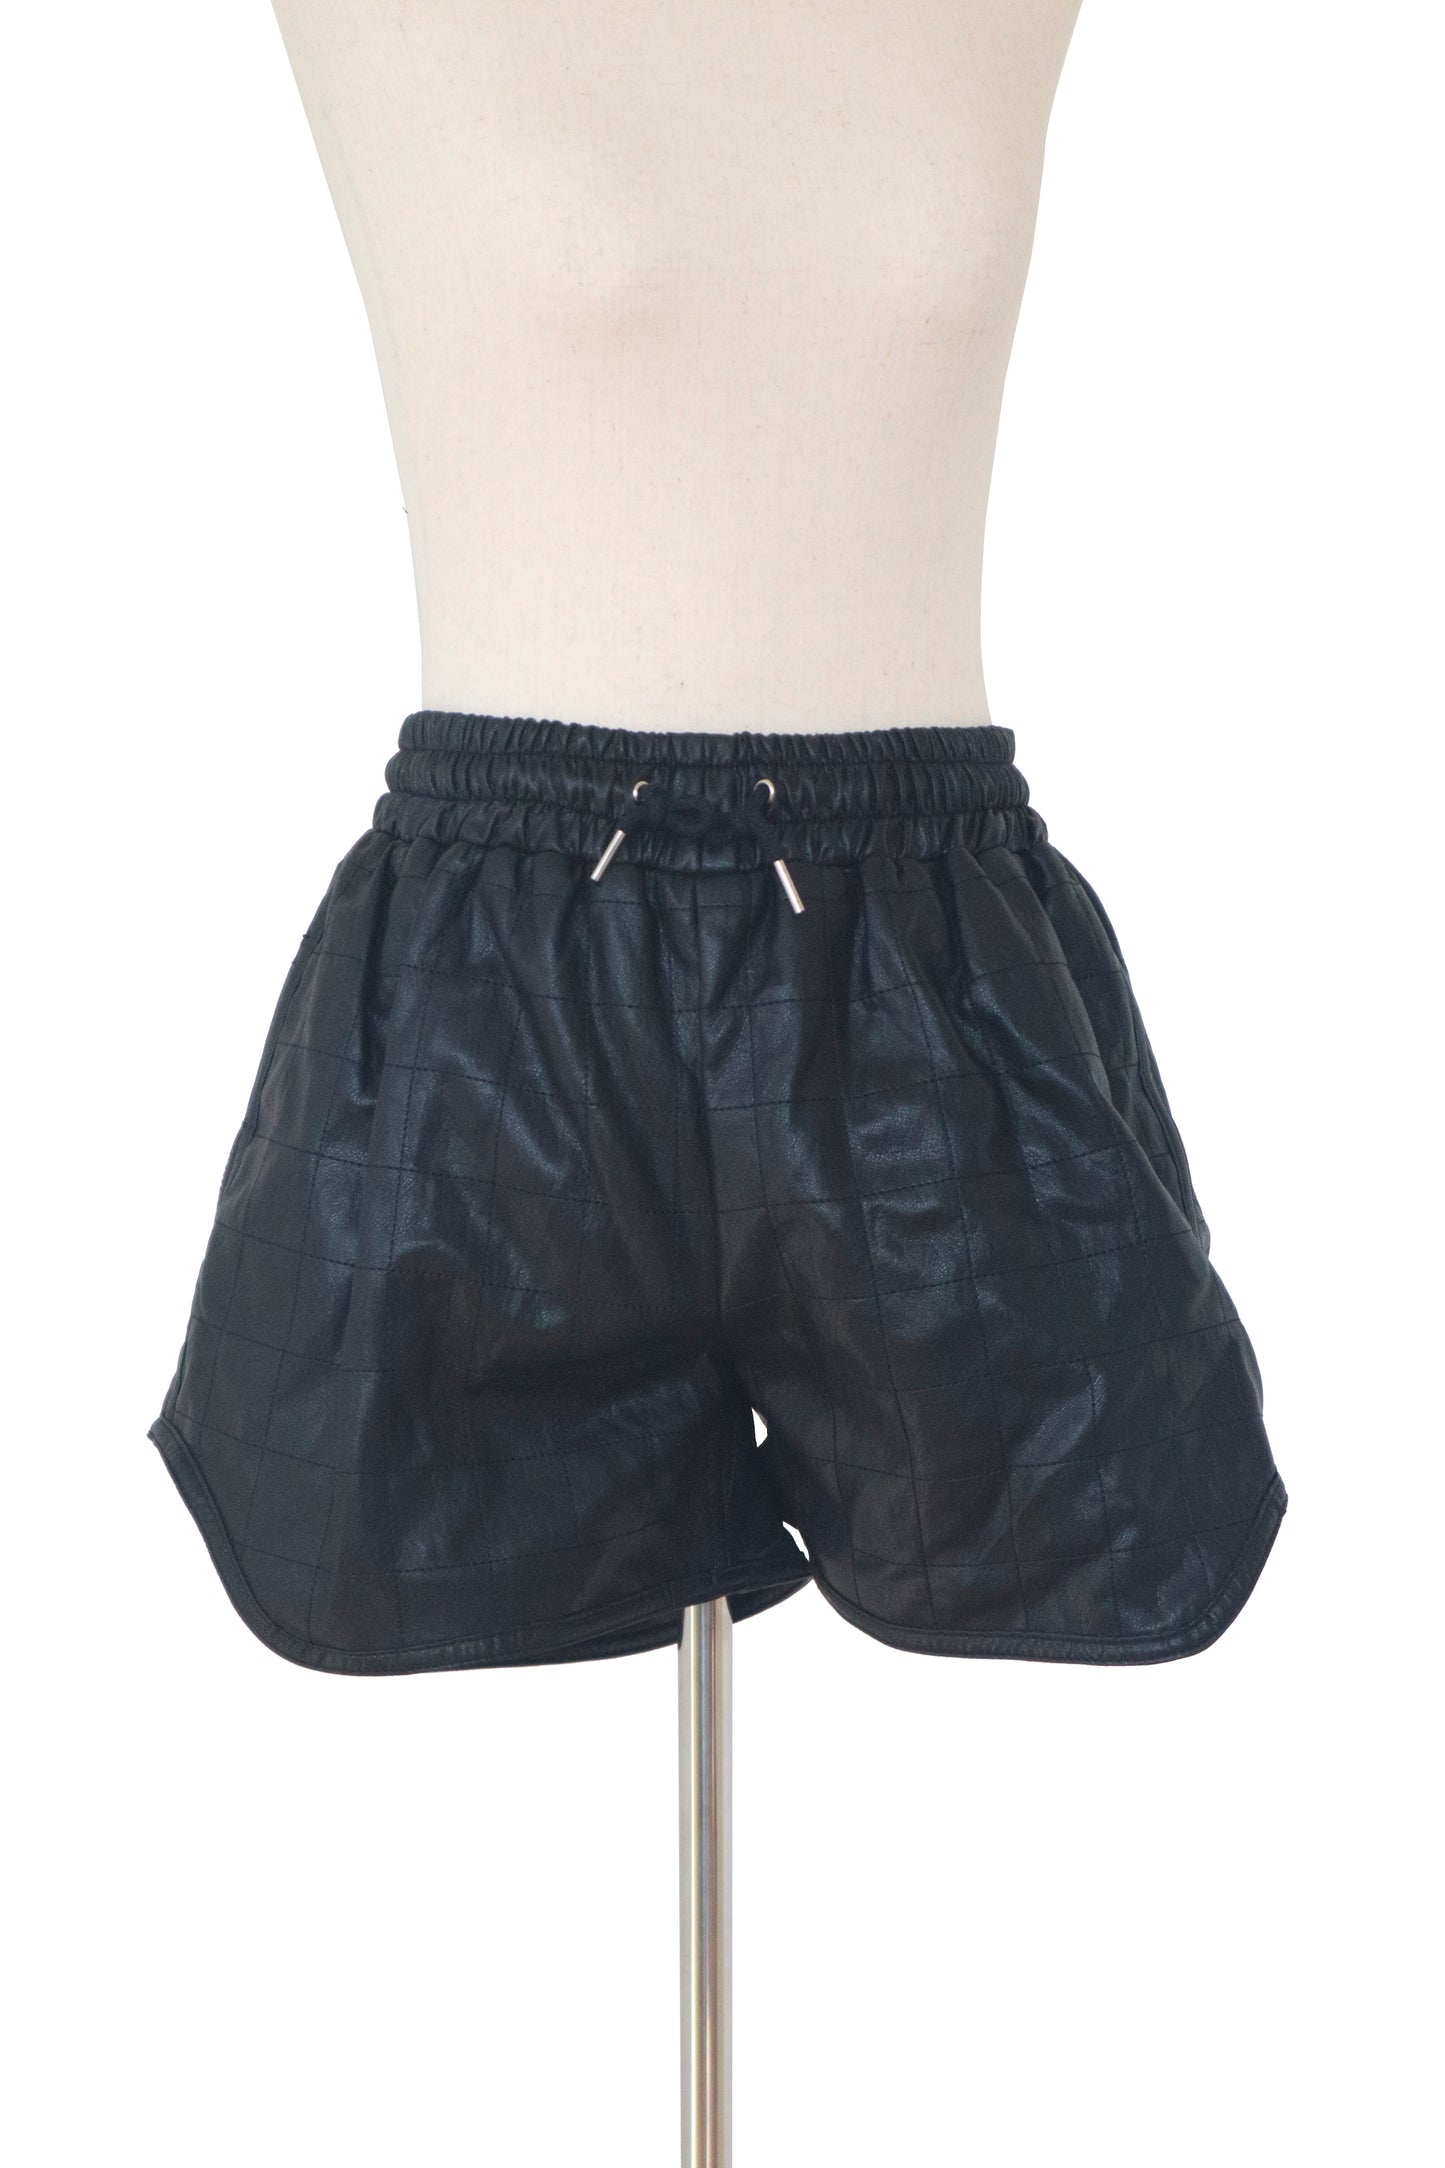 THE FRANKIE SHOP - Black Quilted Shorts - Size L